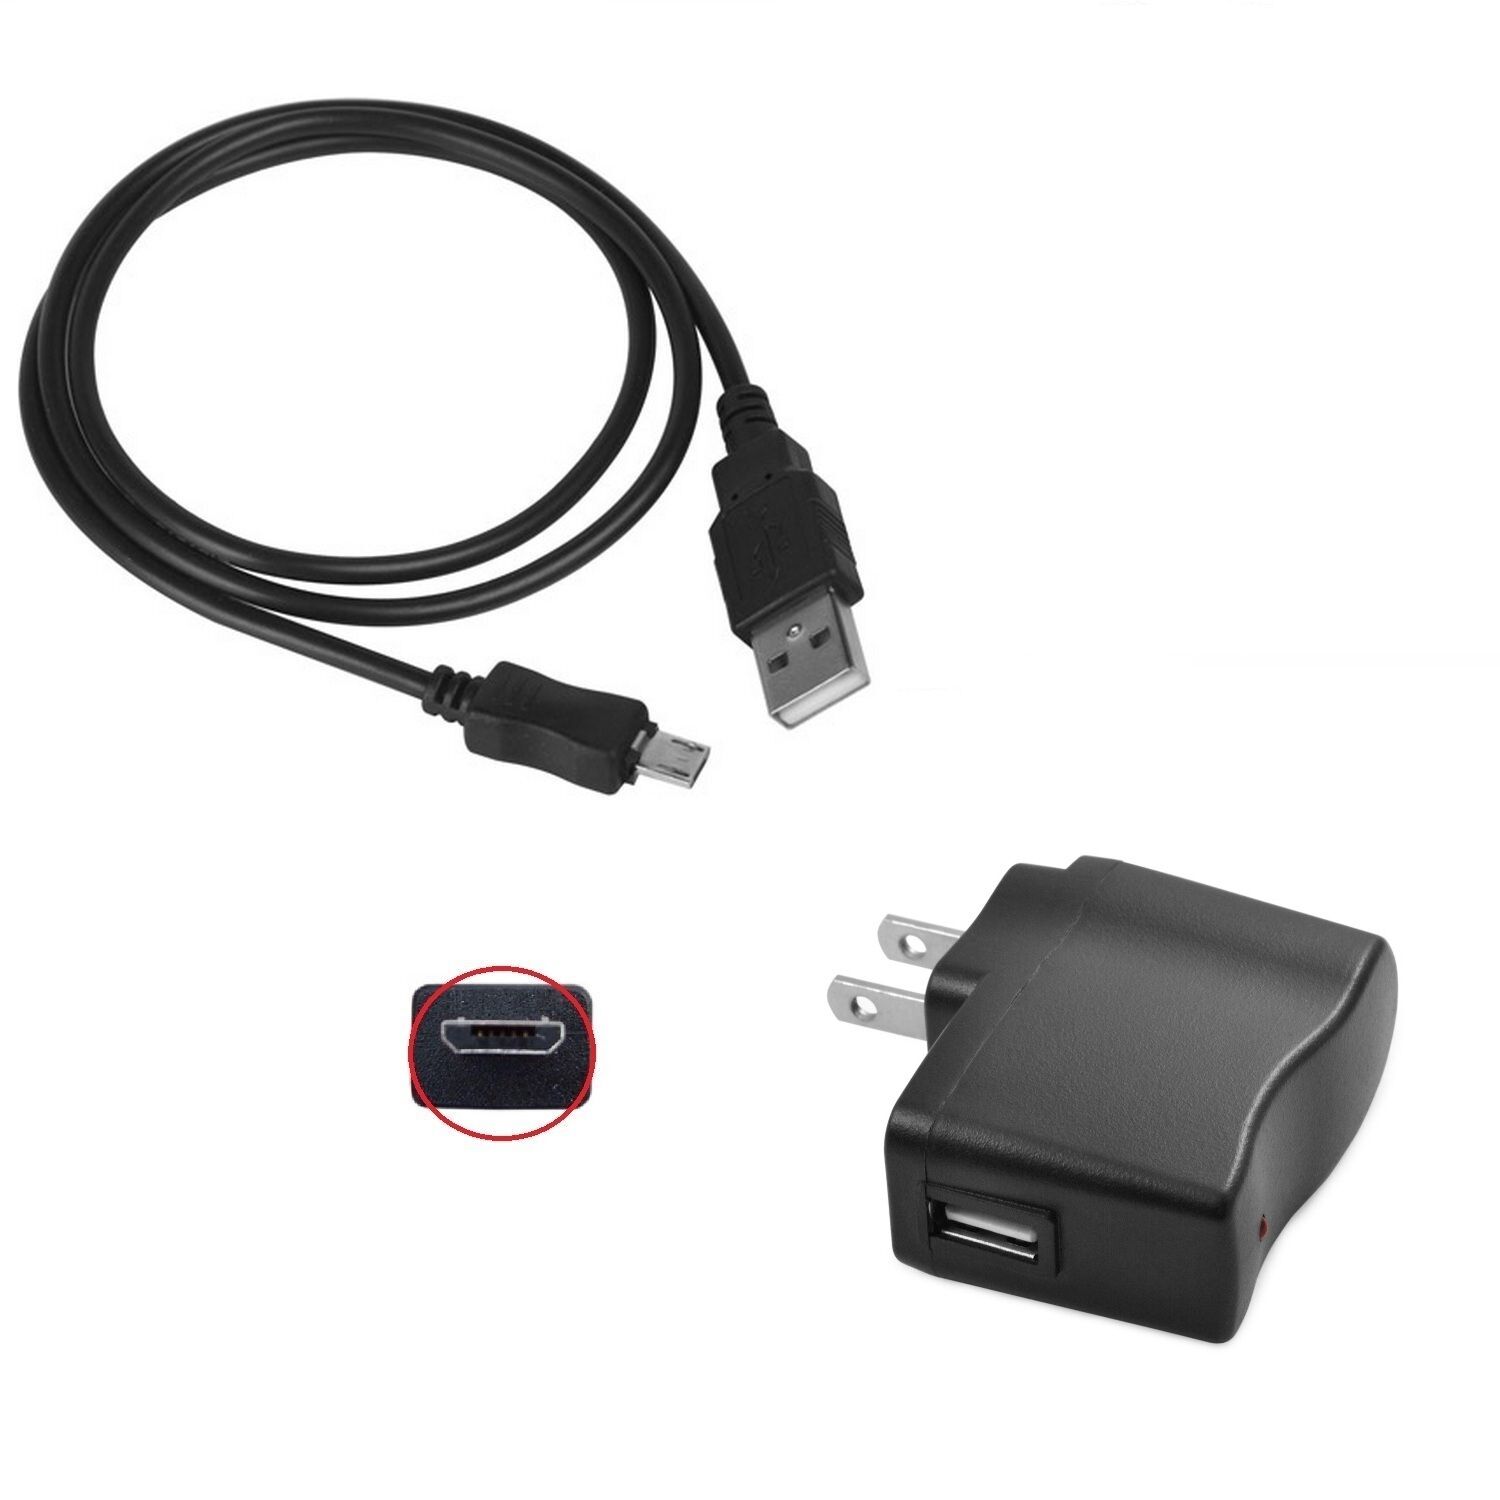 1A AC/DC Wall Power Charger Adapter Cord for ASUS Google Nexus 7 Tablet 1A AC/DC Wall Power Charger Adapter Cord for AS